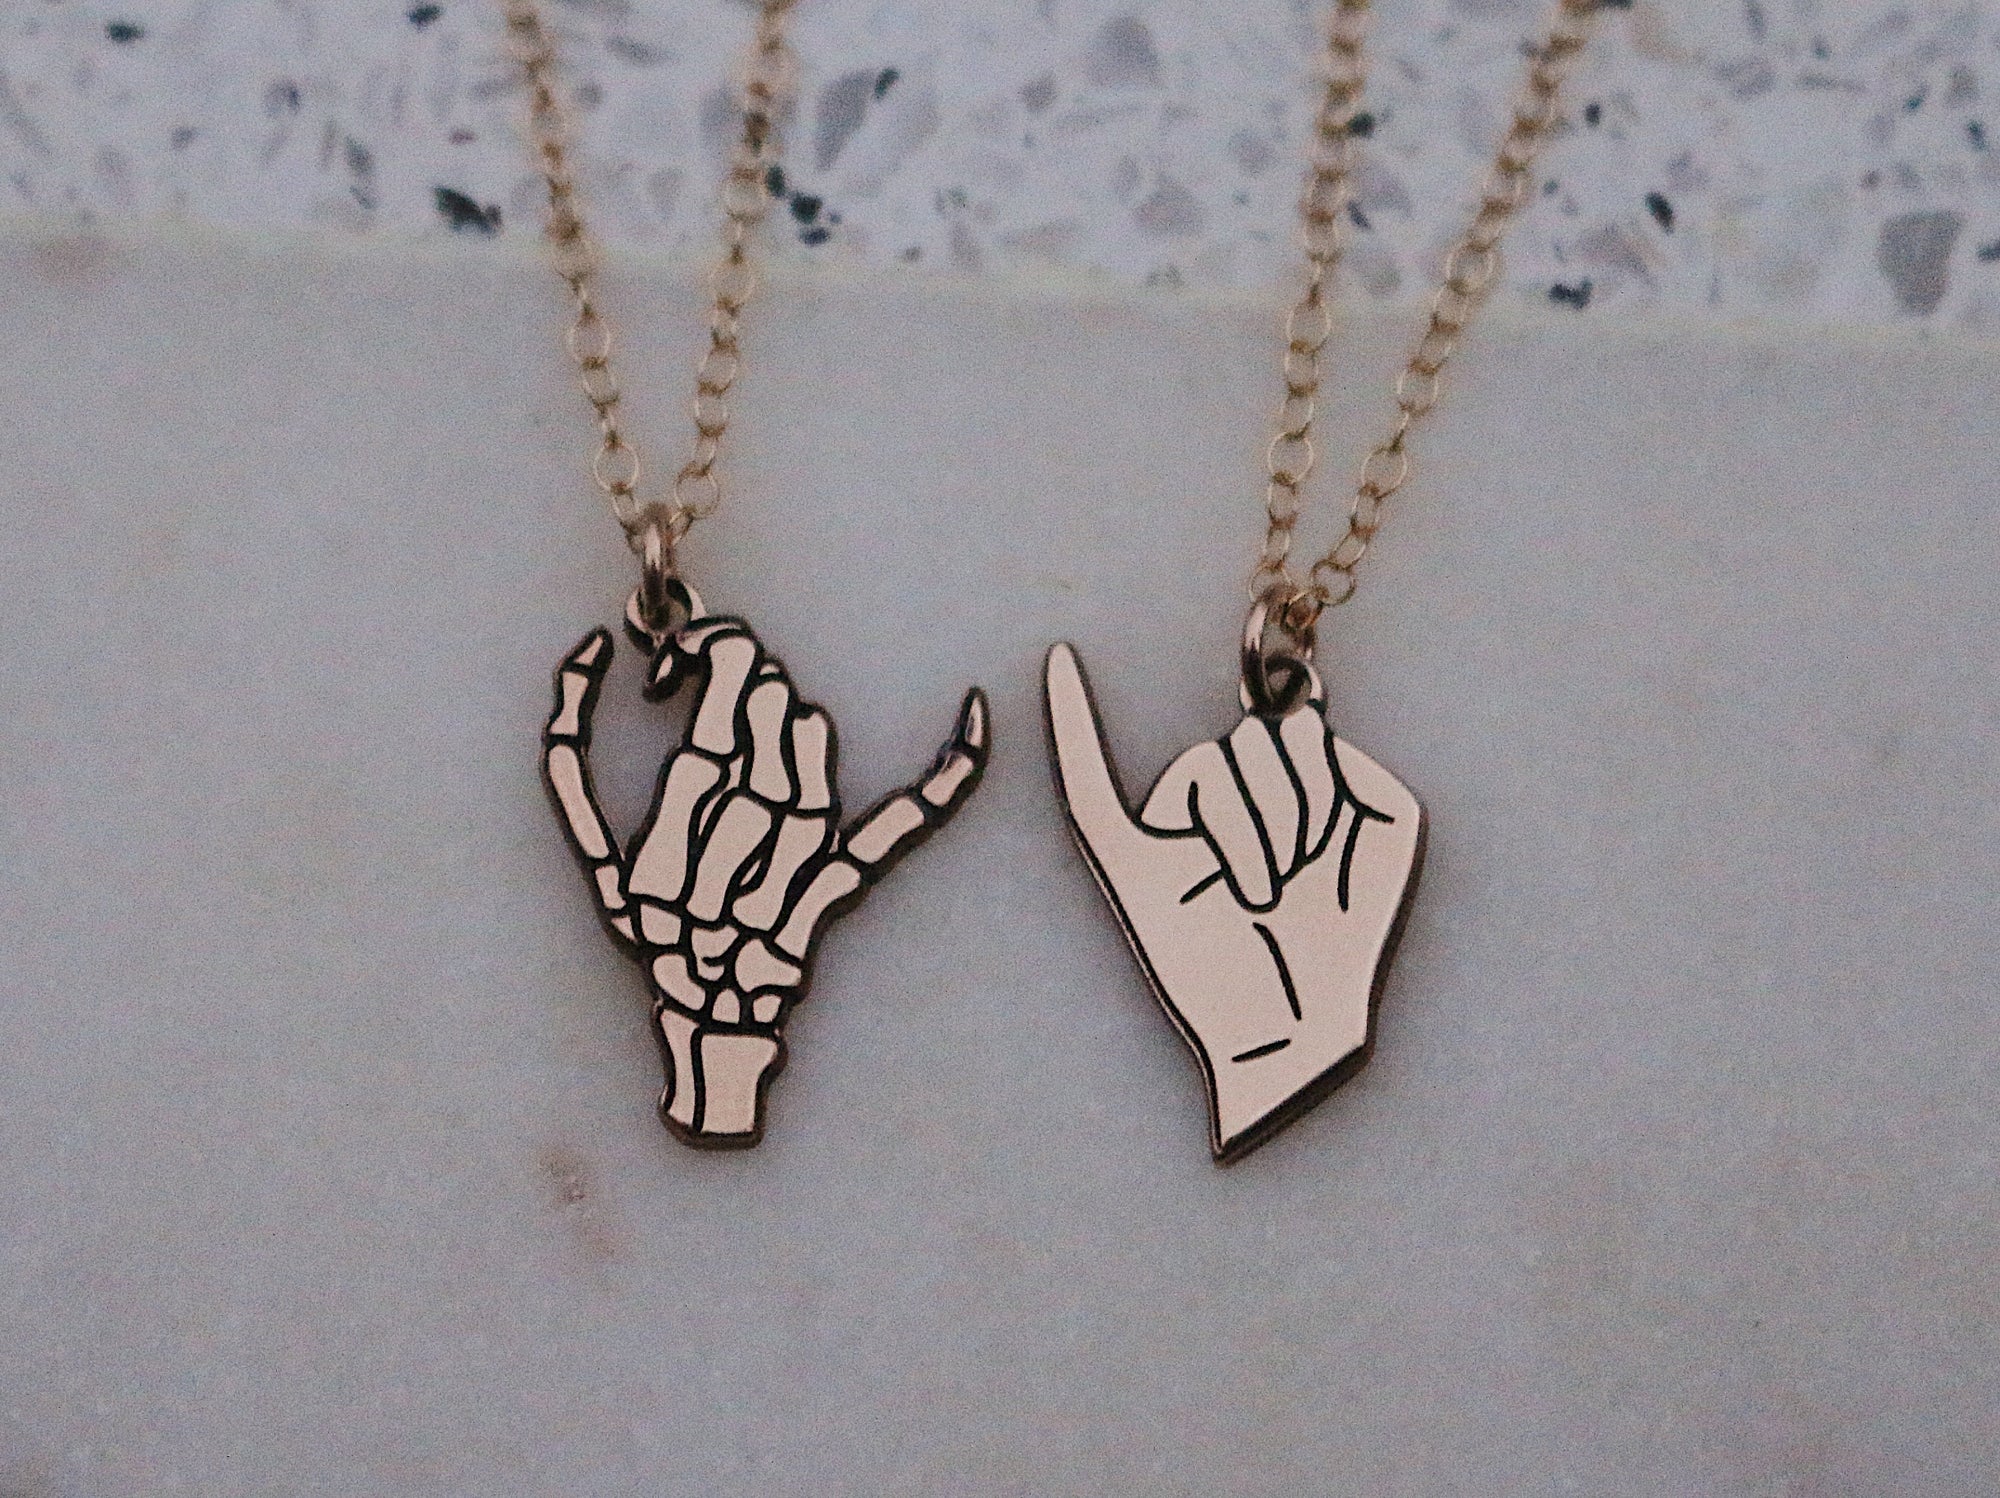 Matching 2 Necklace Gold Filled Skeleton Pinky Swear Necklace Set | Best Friend Gift | Pinky Promise Couples Jewelry | Matching Gift for Her